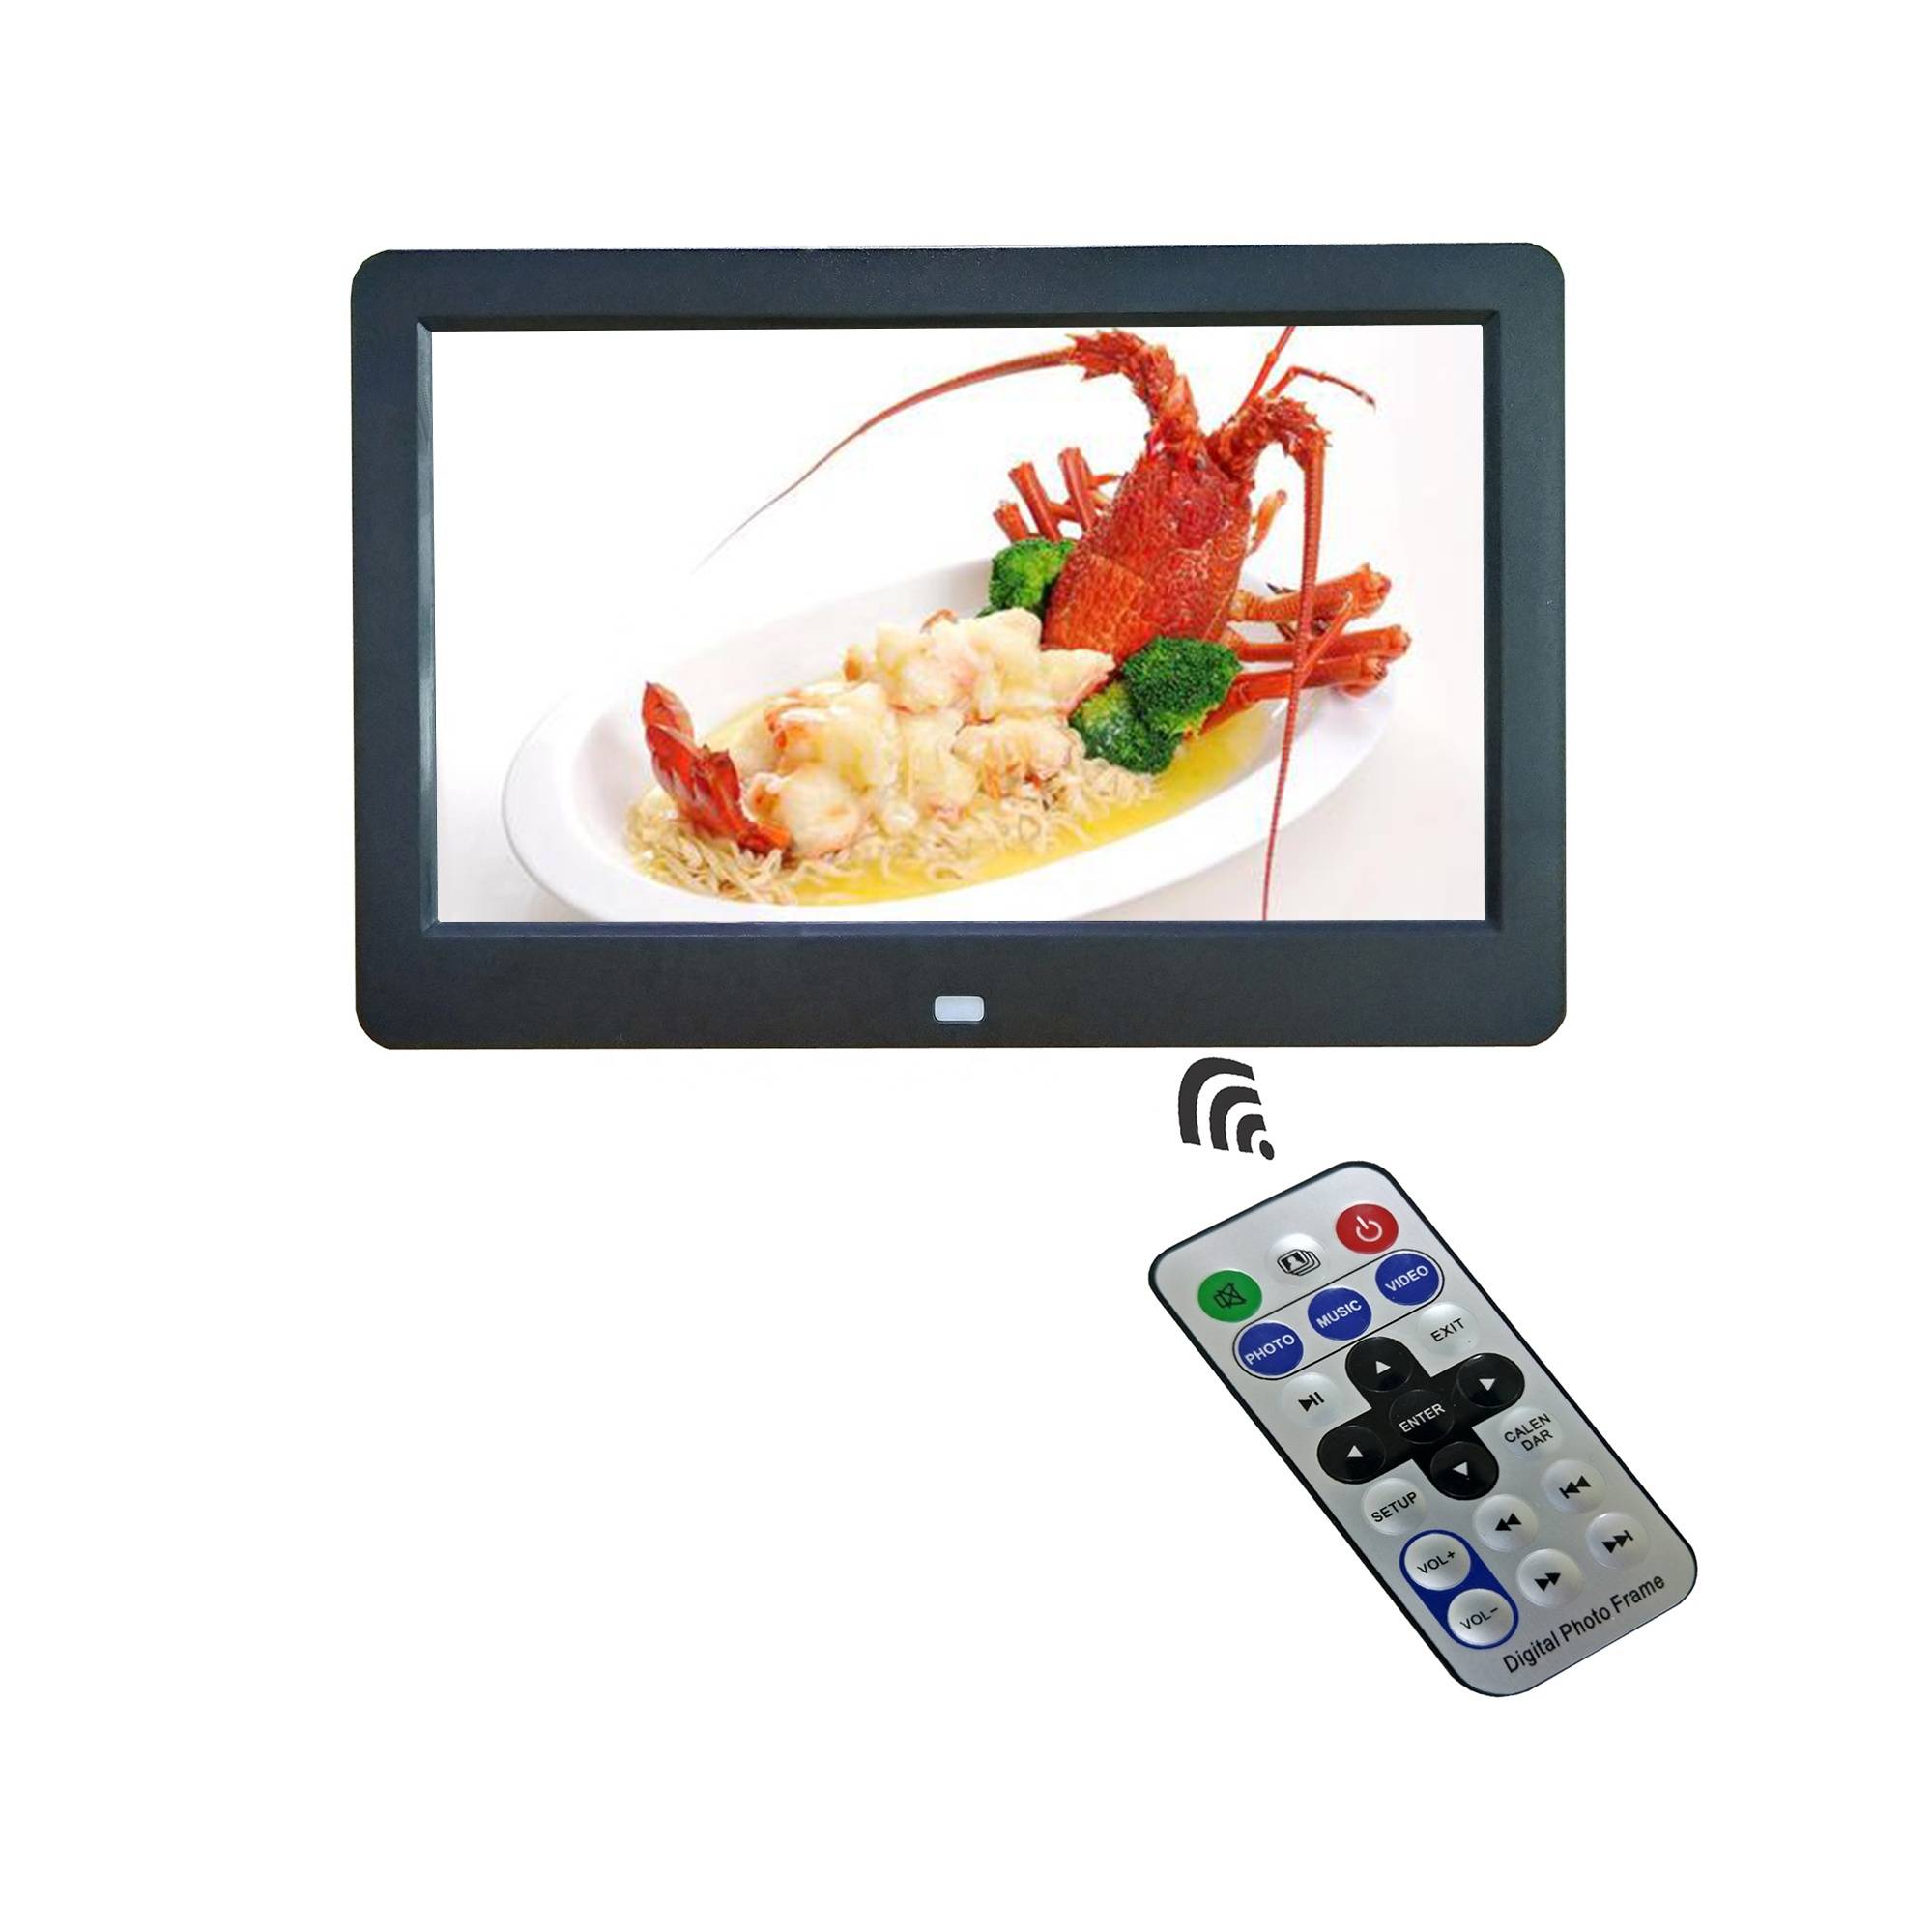 One of Hottest for Big Digital Picture Frame - popular auto play video 16:9 support 720P digital display frames 10 inch digital photo frame – Idealway